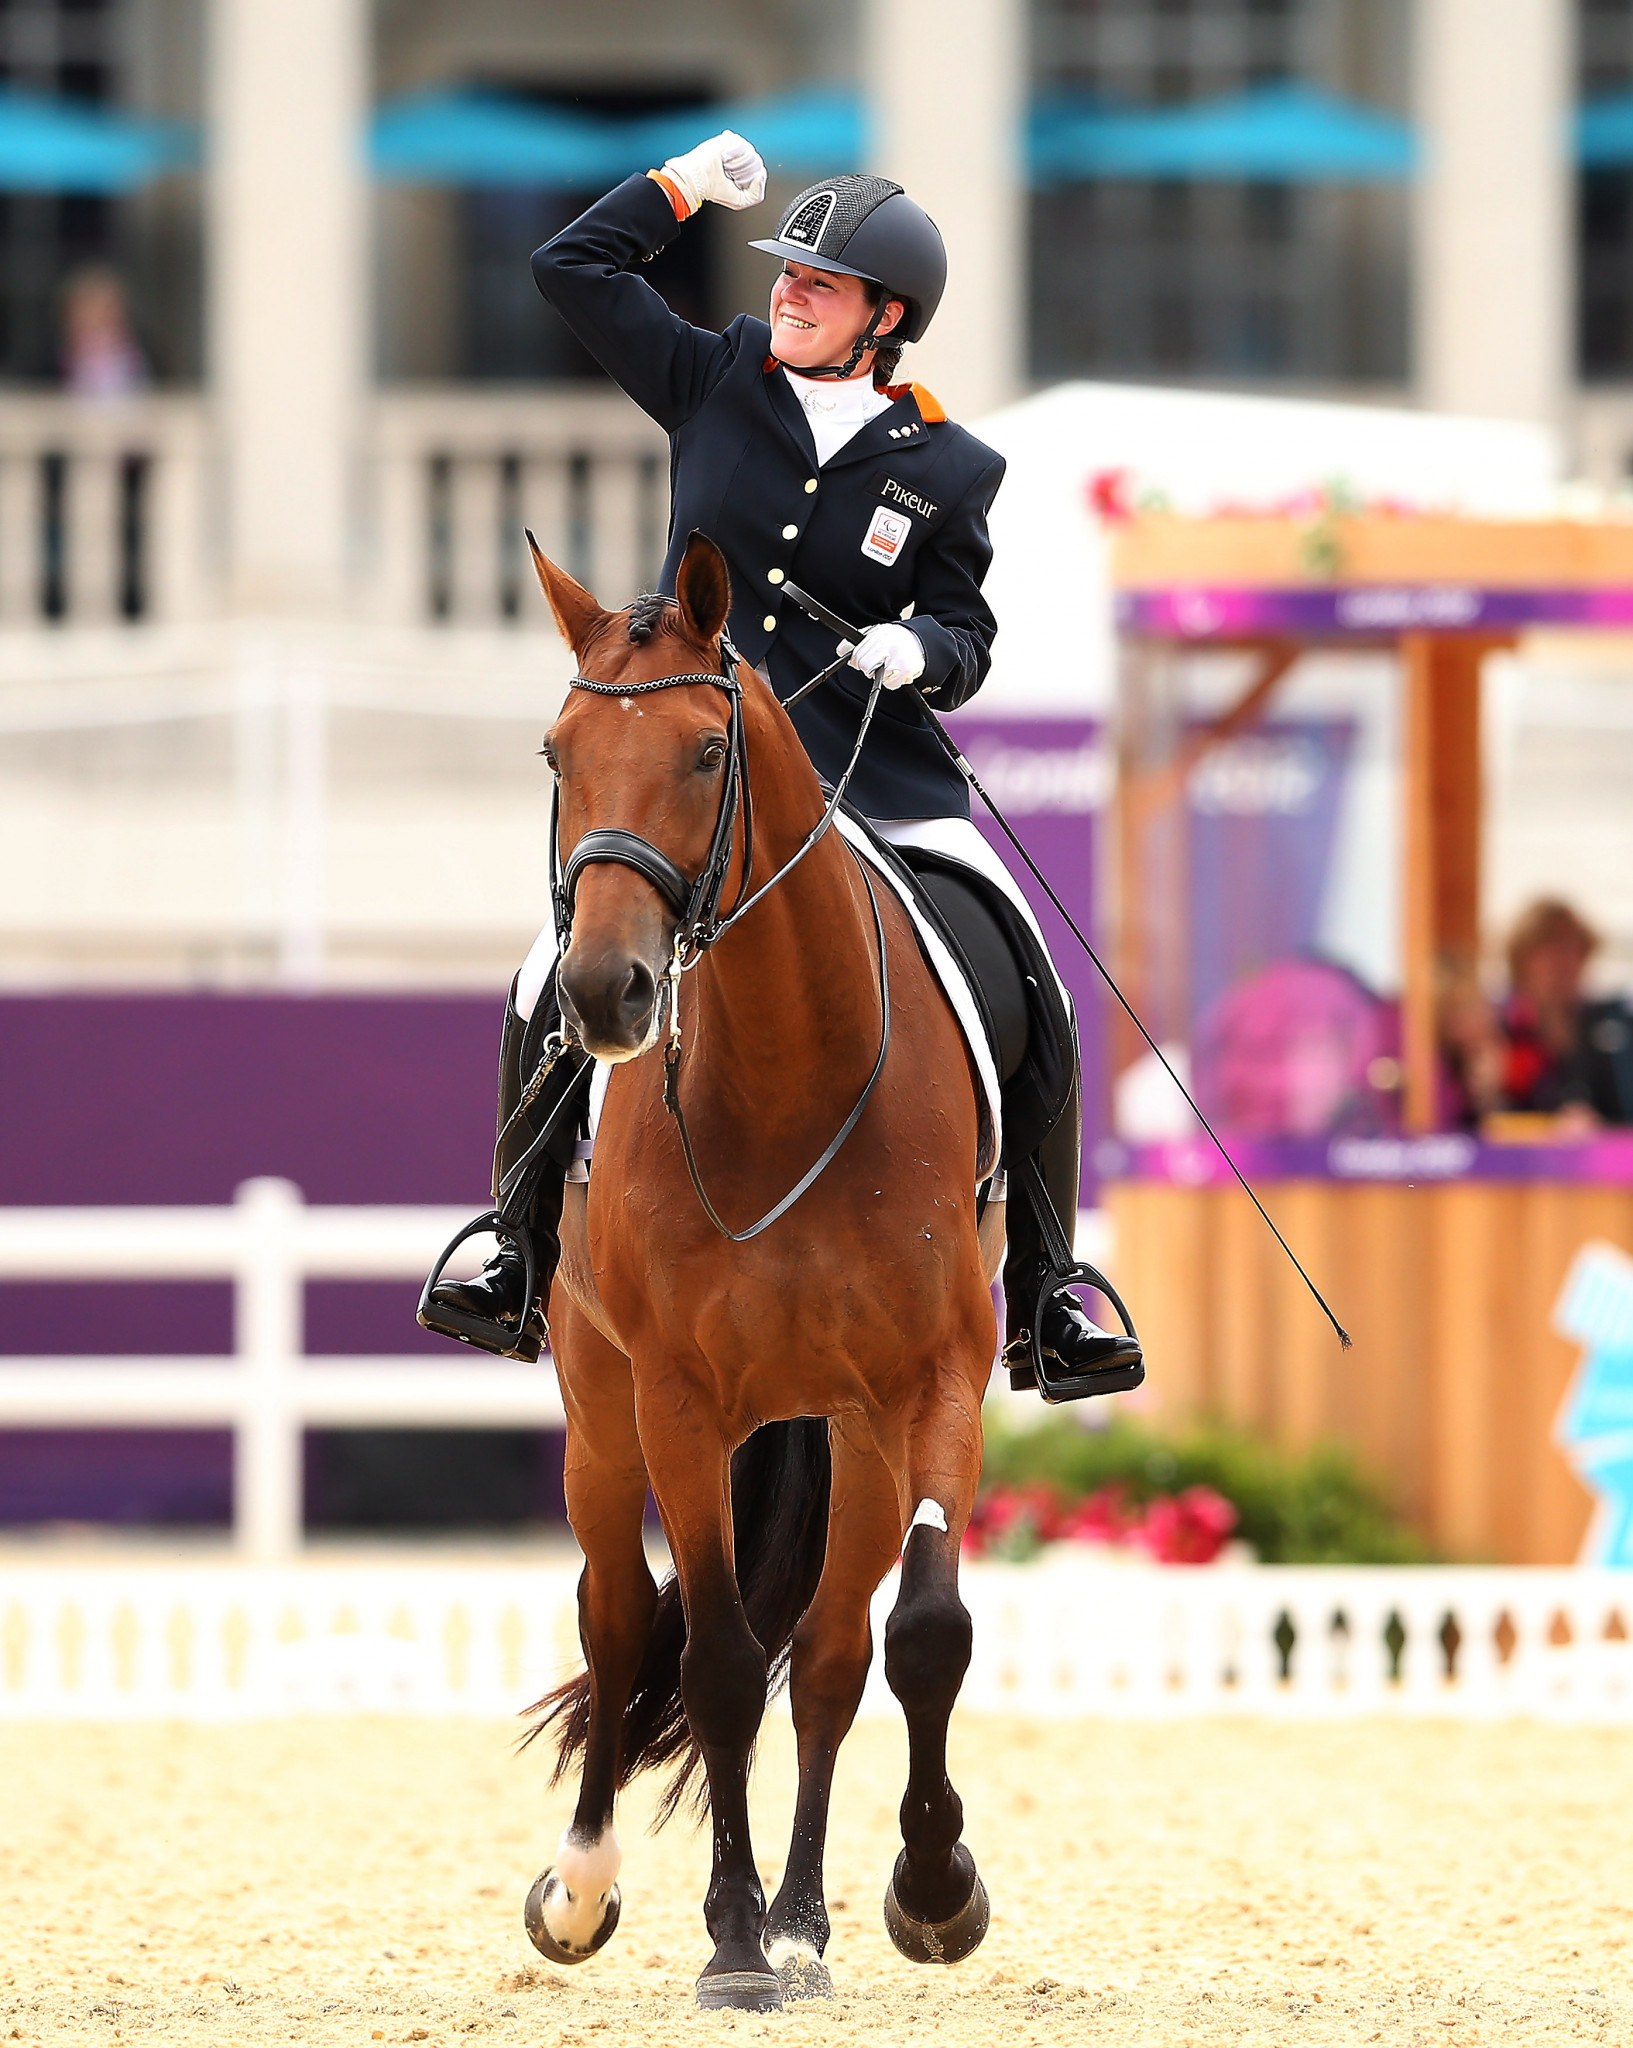 World and European champion Sanne Voets features among the entry list for Para equestrian at Tokyo 2020 ©Getty Images